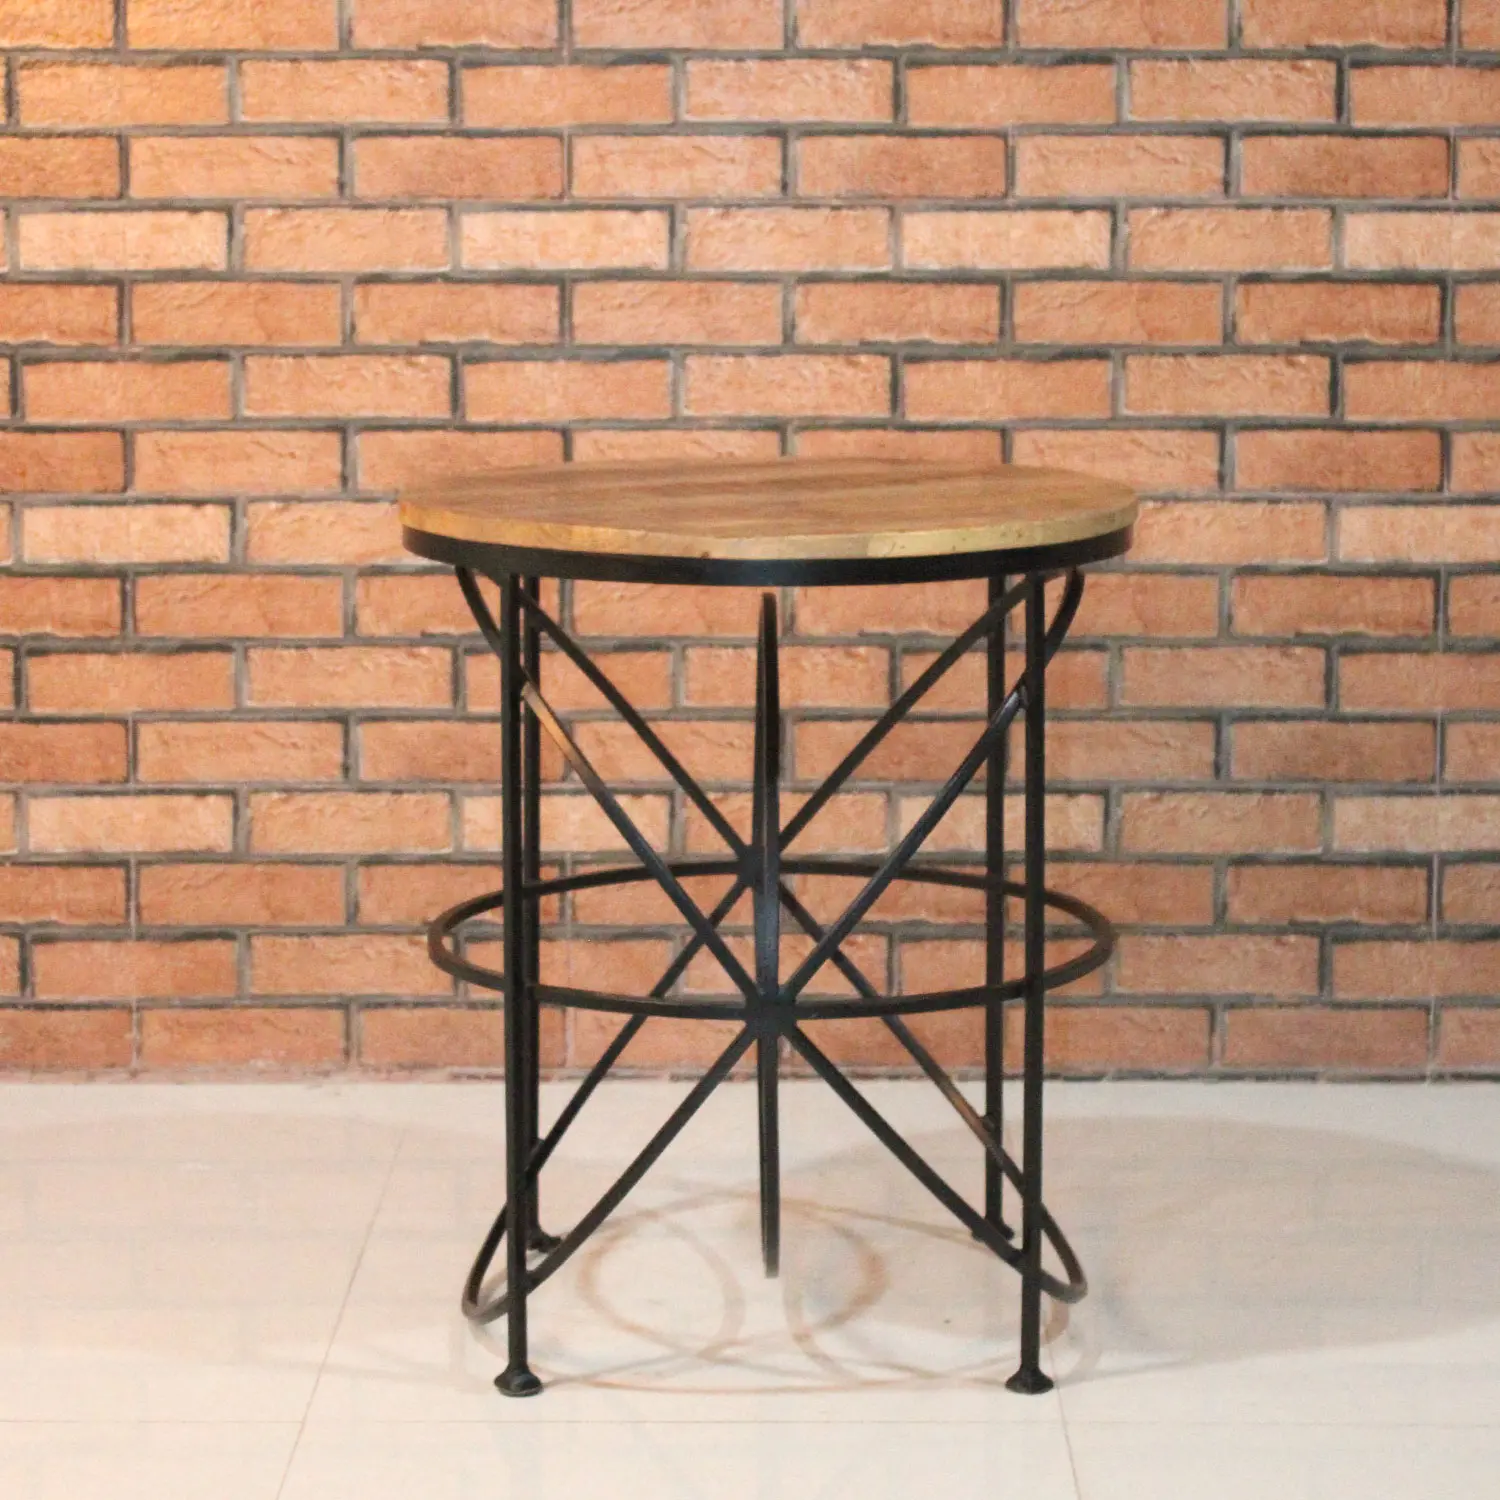 Iron Round Side Table with Wooden Top - popular handicrafts